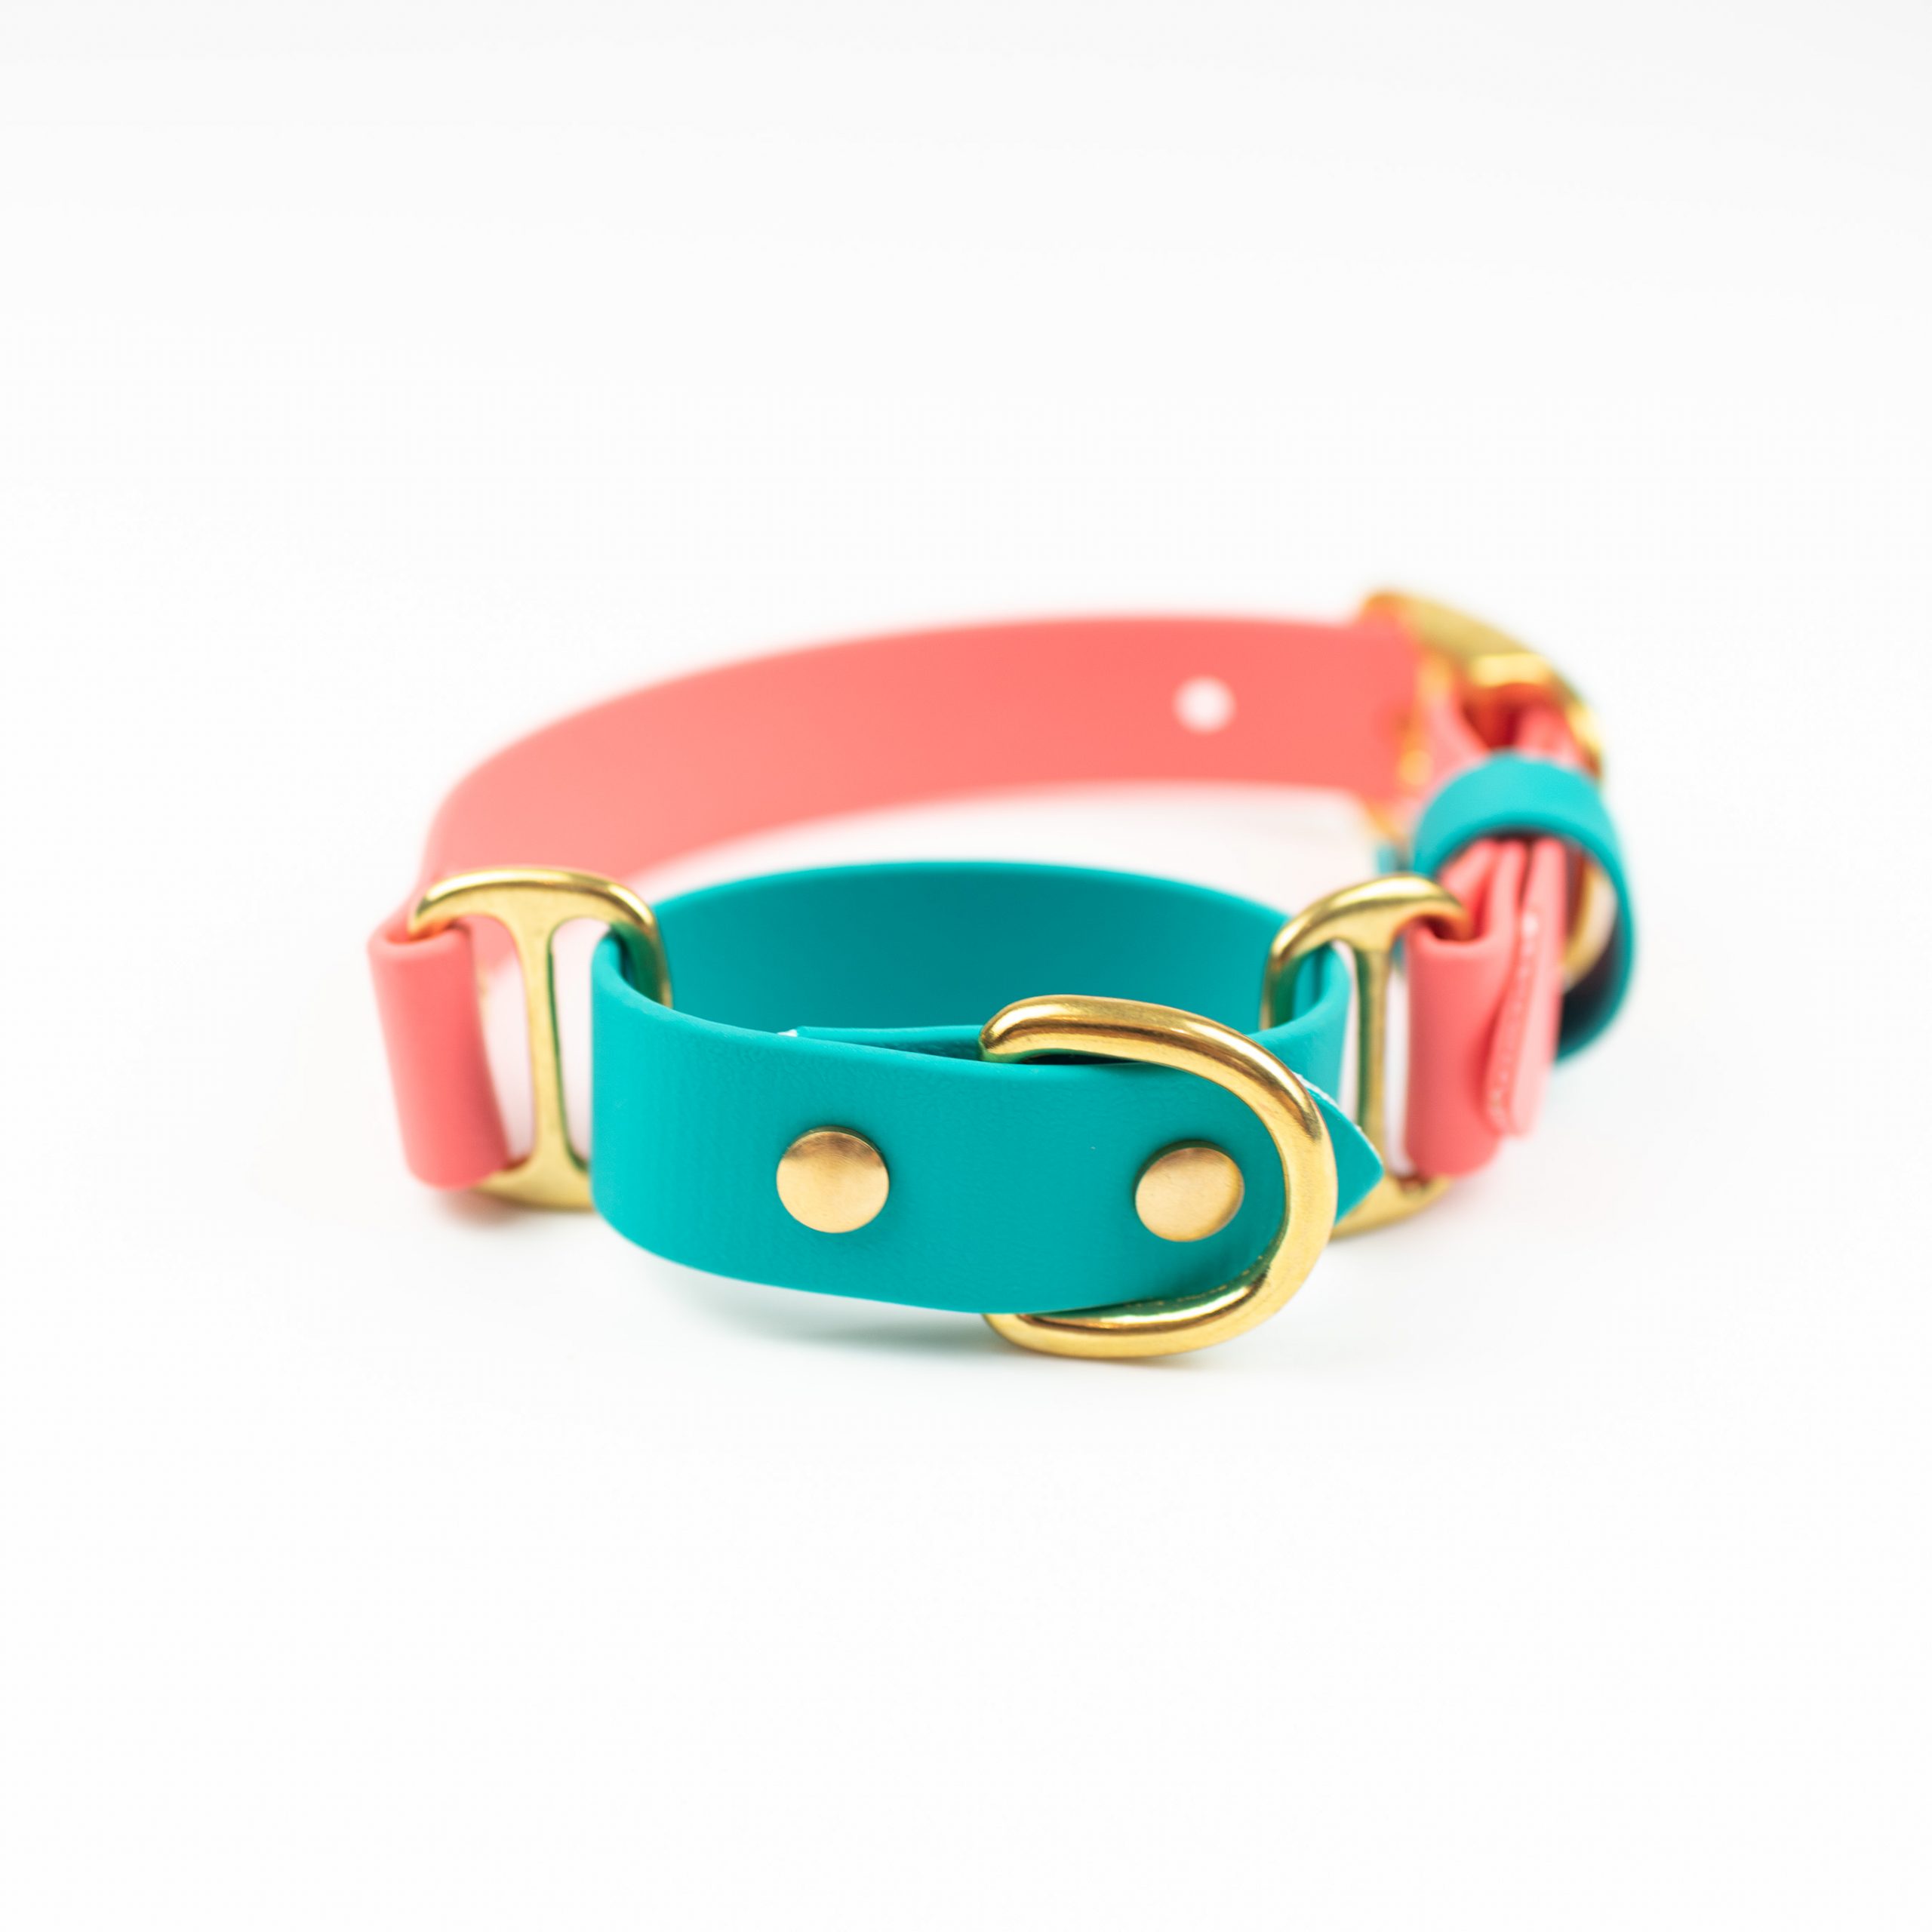 Coral, teal and brass solid brass Adventure Martingale collar